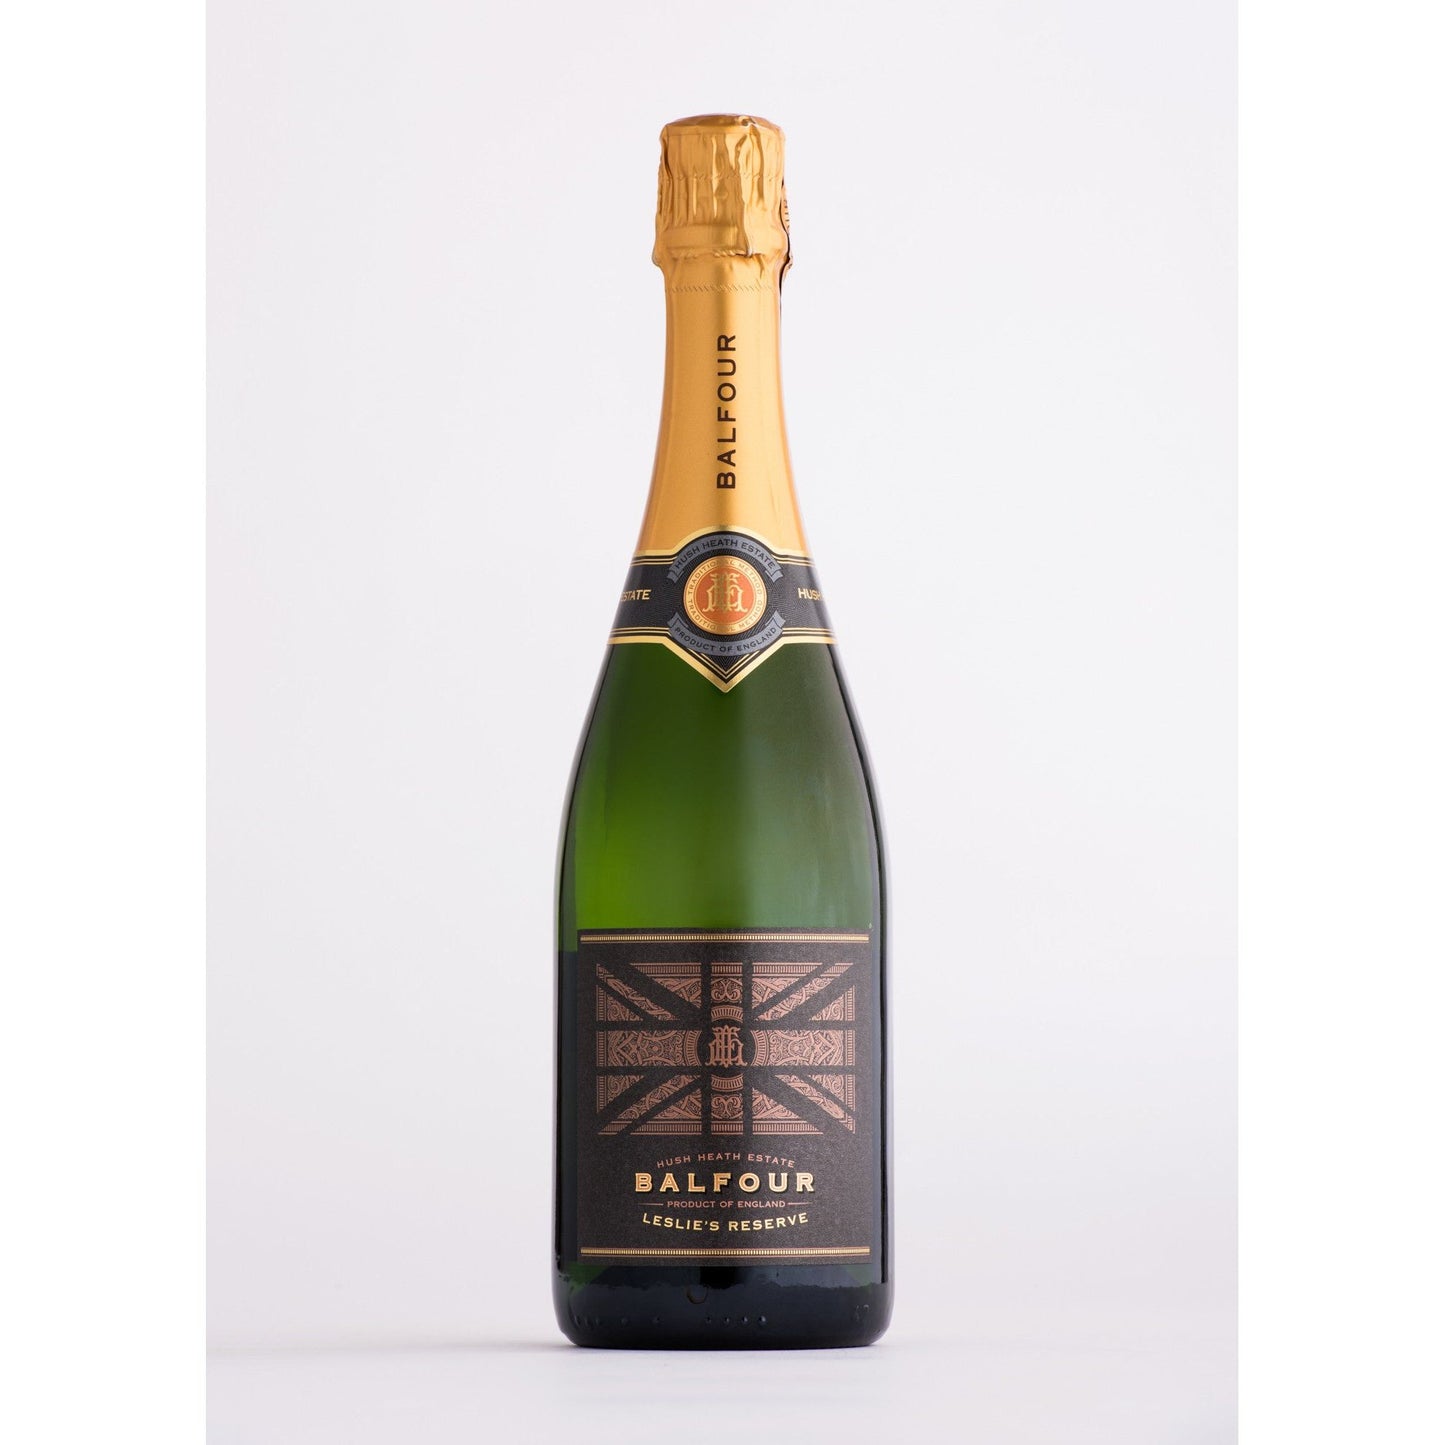 Hush Heath Balfour Leslies Reserve Sparkling White The English Wine Collection 